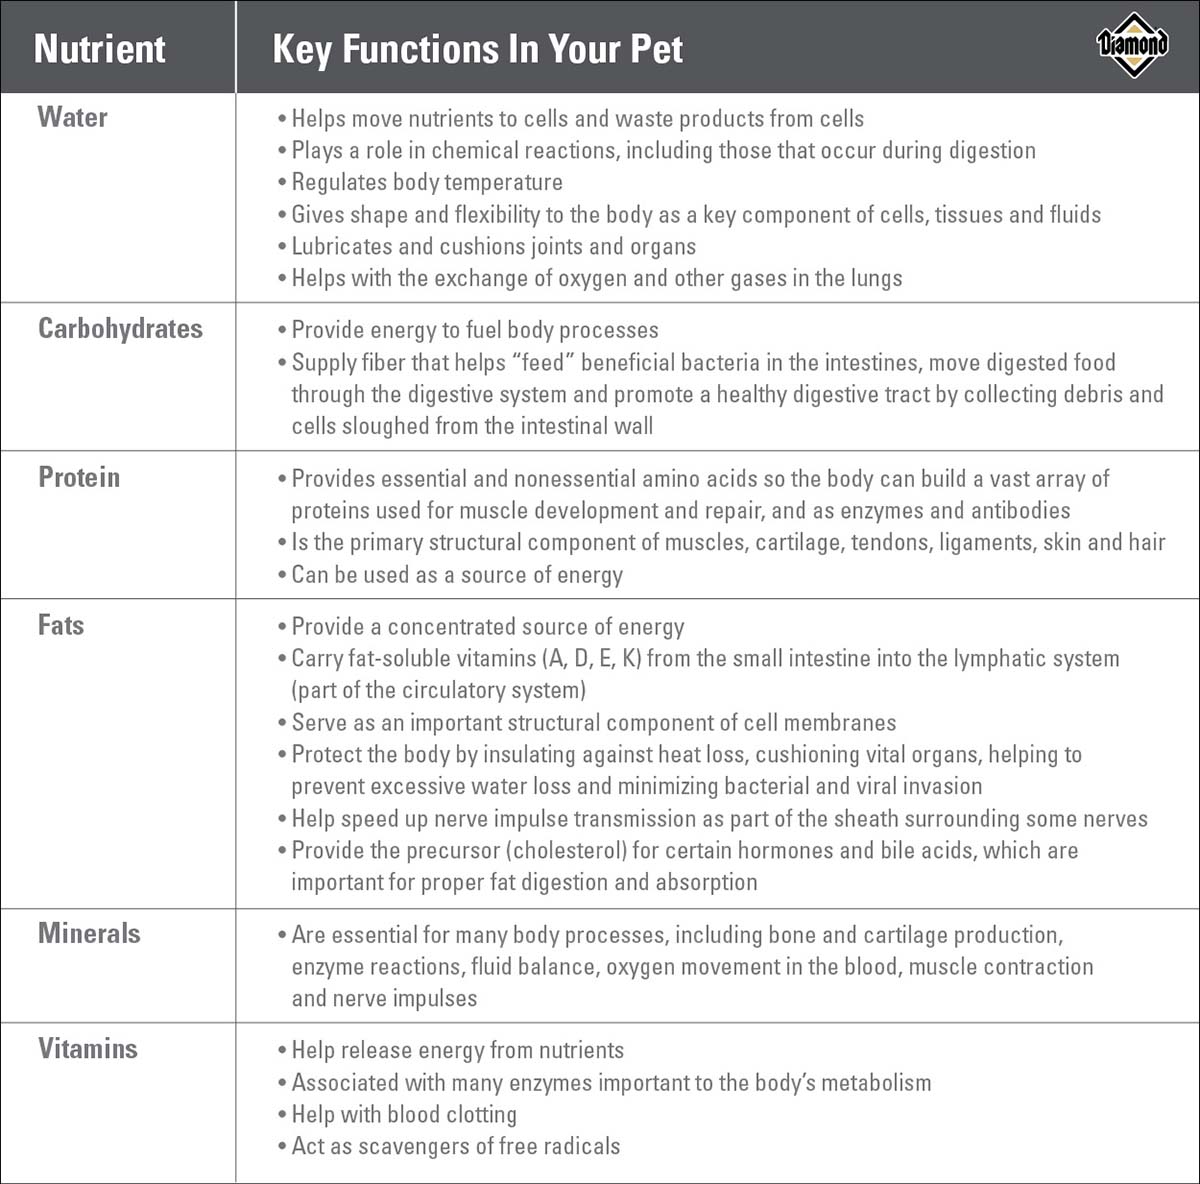 An interior graphic listing common nutrients and the key functions that they serve in pets.